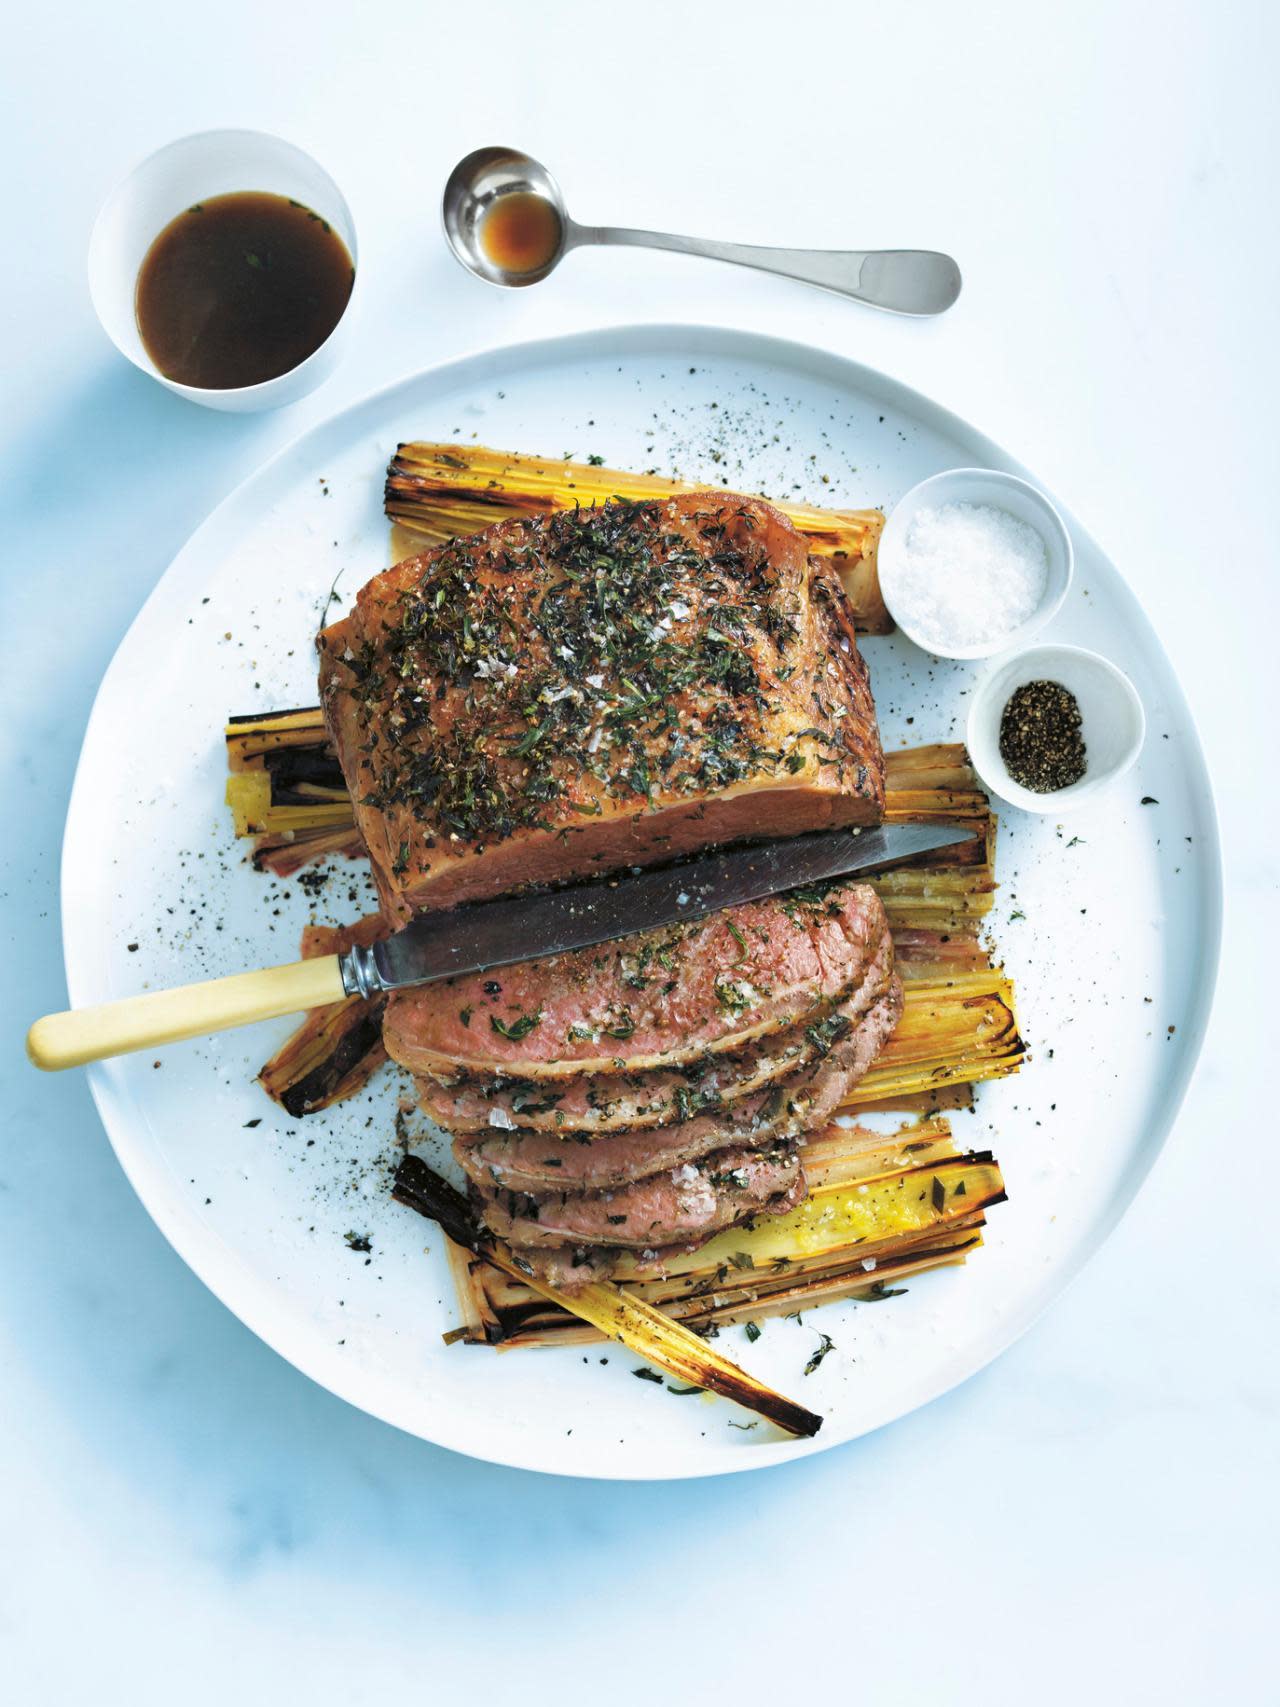 Slow-Roasted Beef with Leeks from ‘The New Easy’